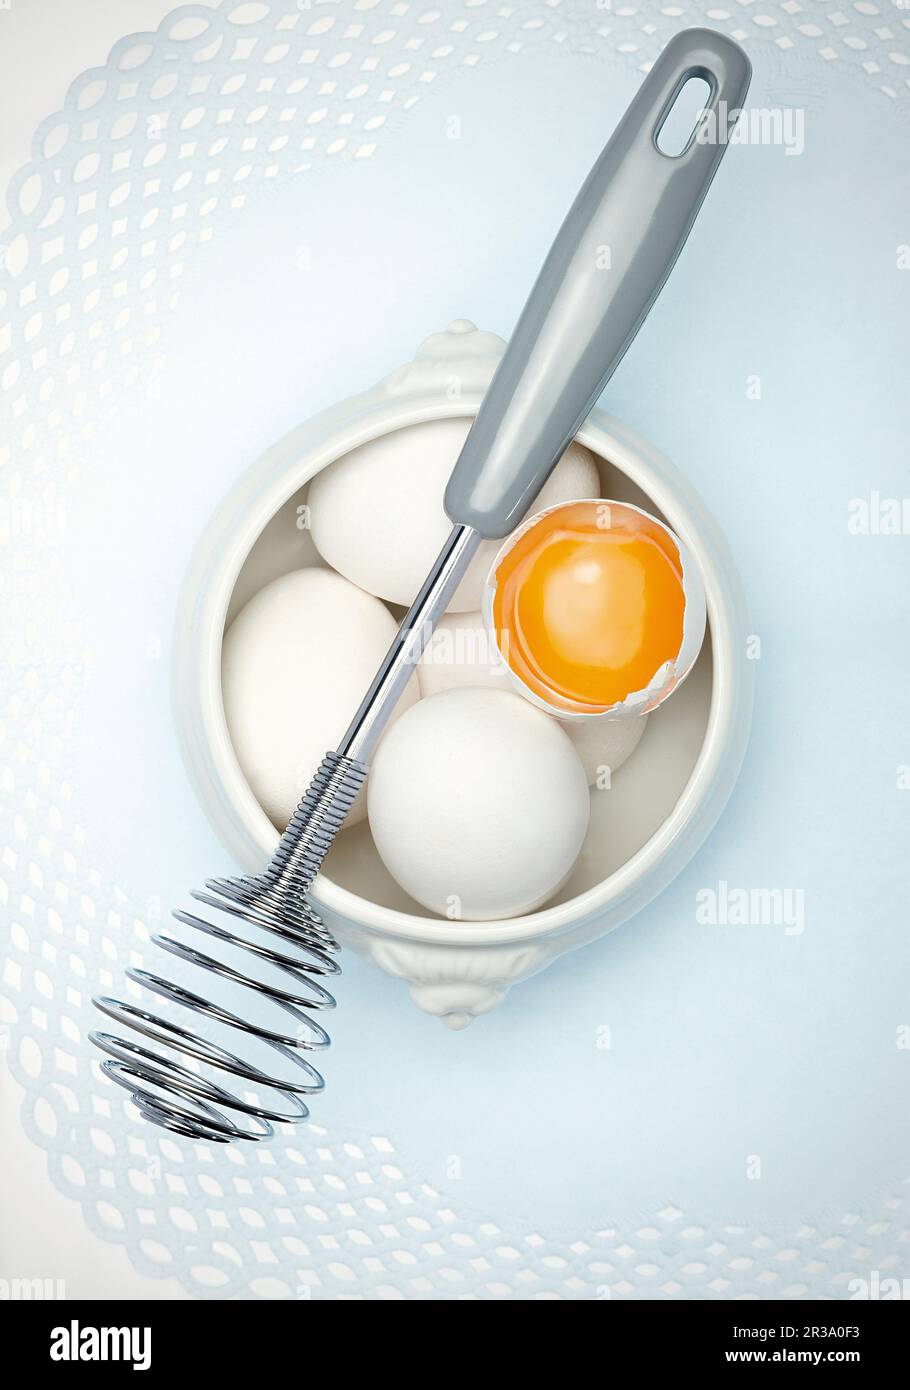 Eggs and a whisk Stock Photo